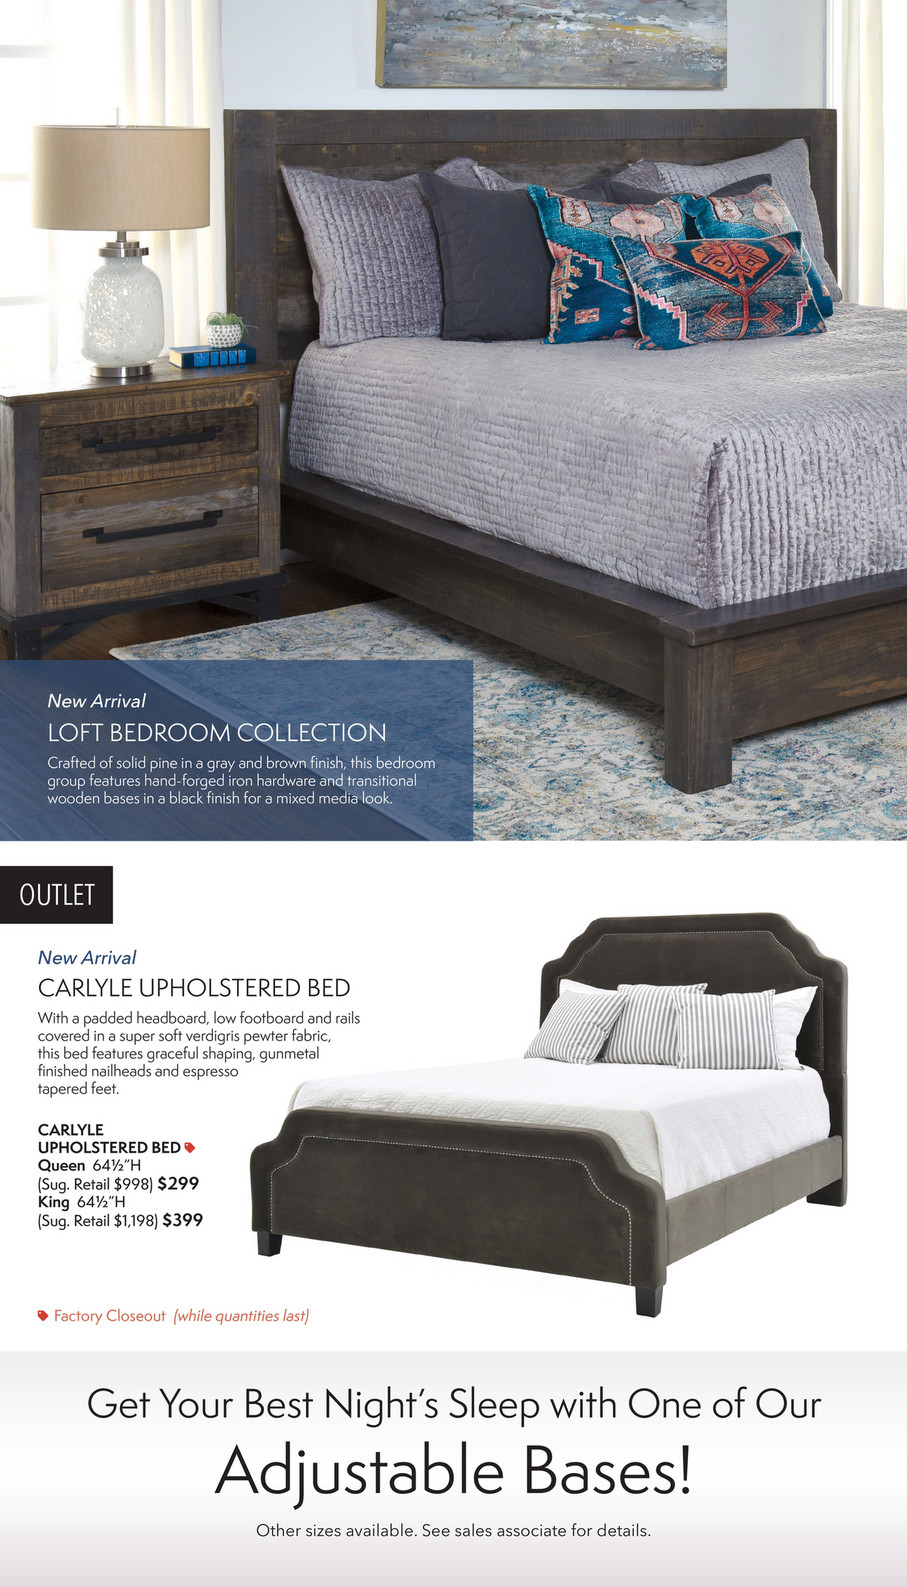 Weir S Furniture 2020 Jan Bedding For Website Page 4 5